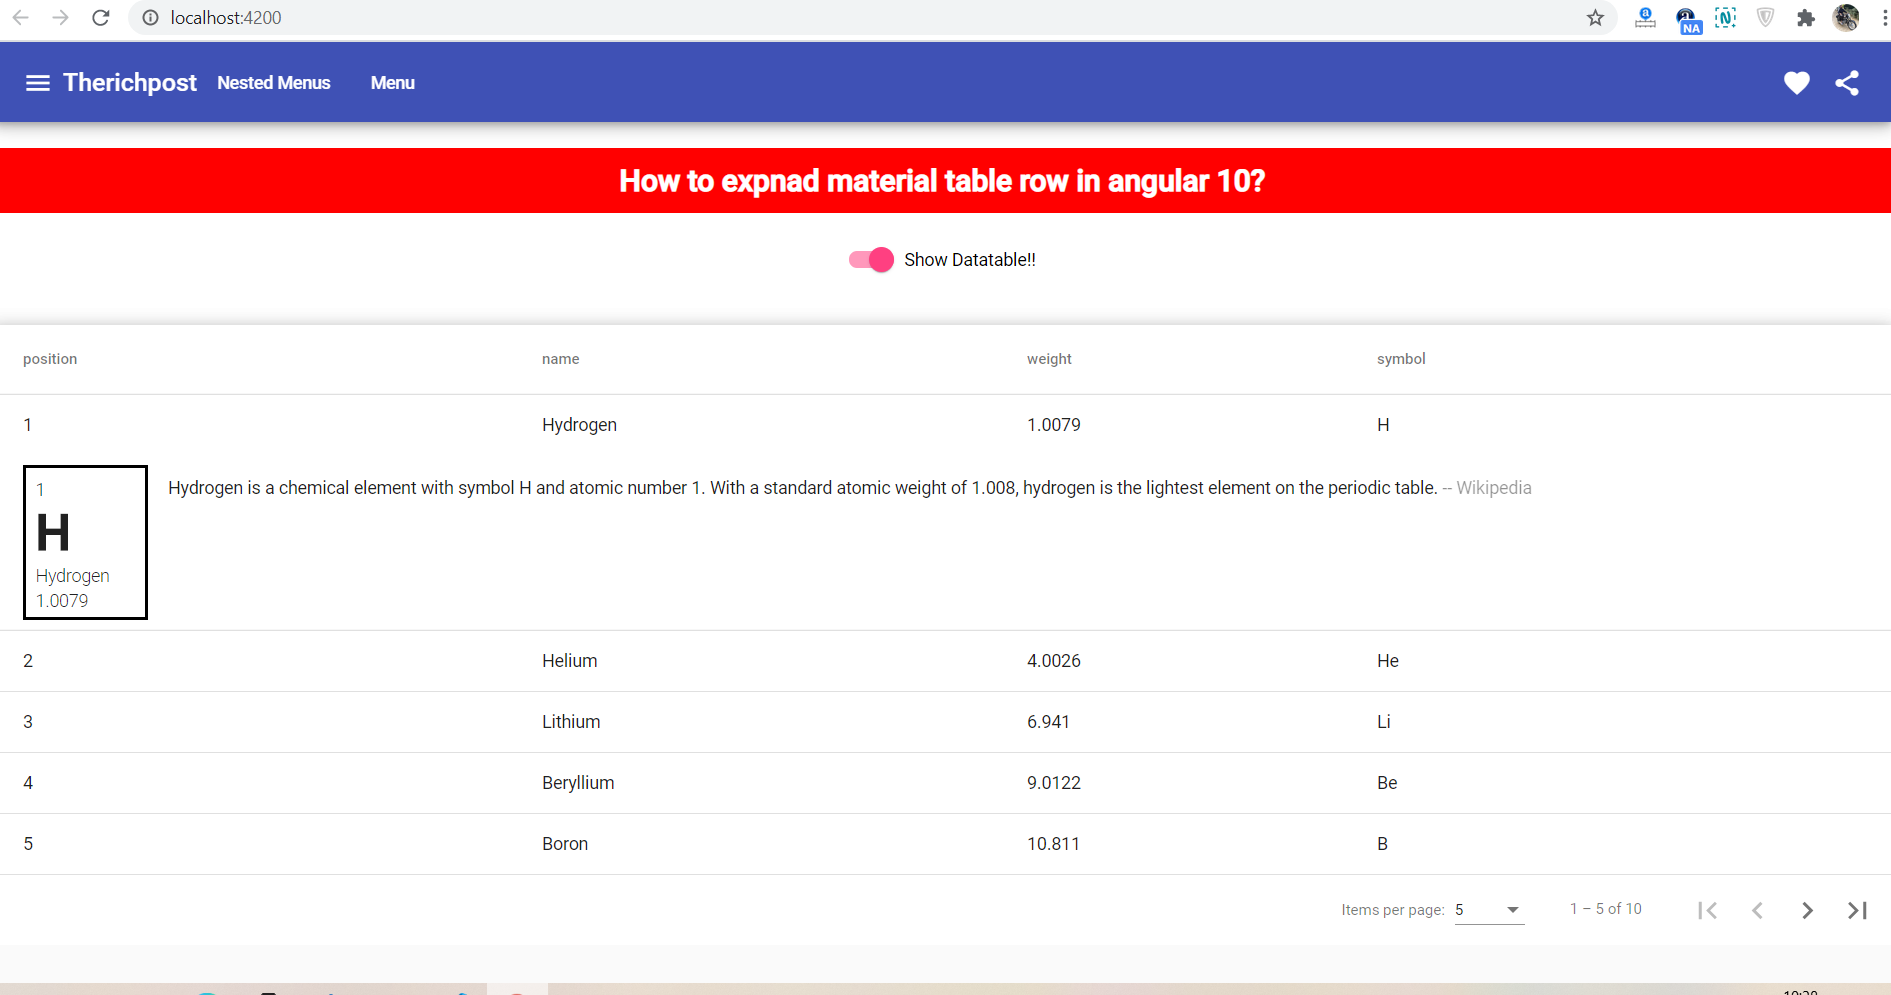 How to expand angular 10 material table row?